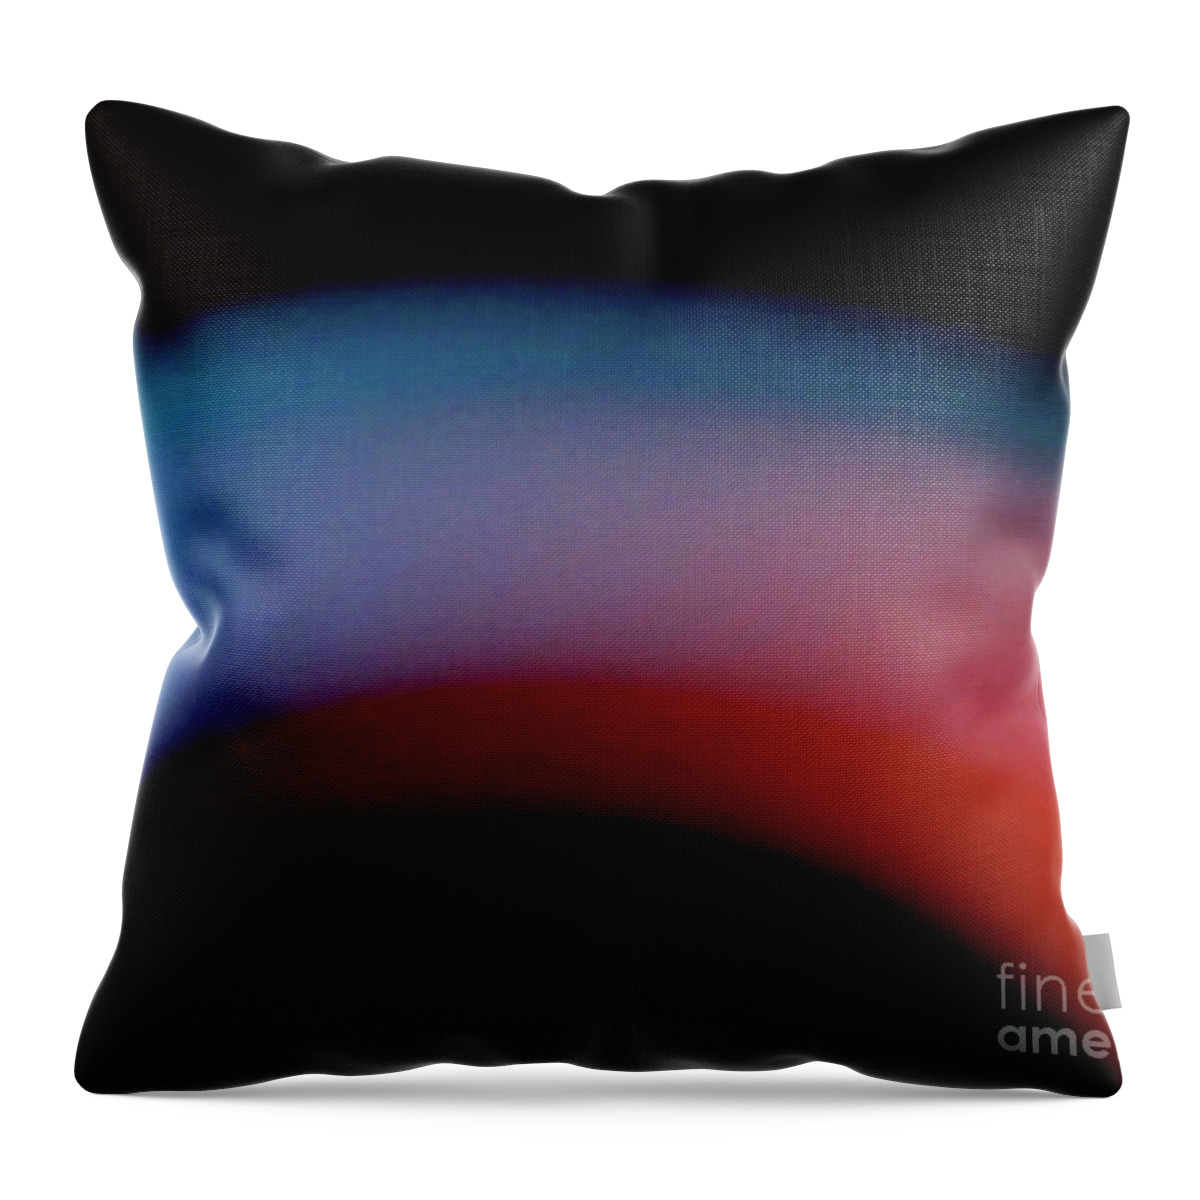 Cml Brown Throw Pillow featuring the photograph Never The Twain by CML Brown